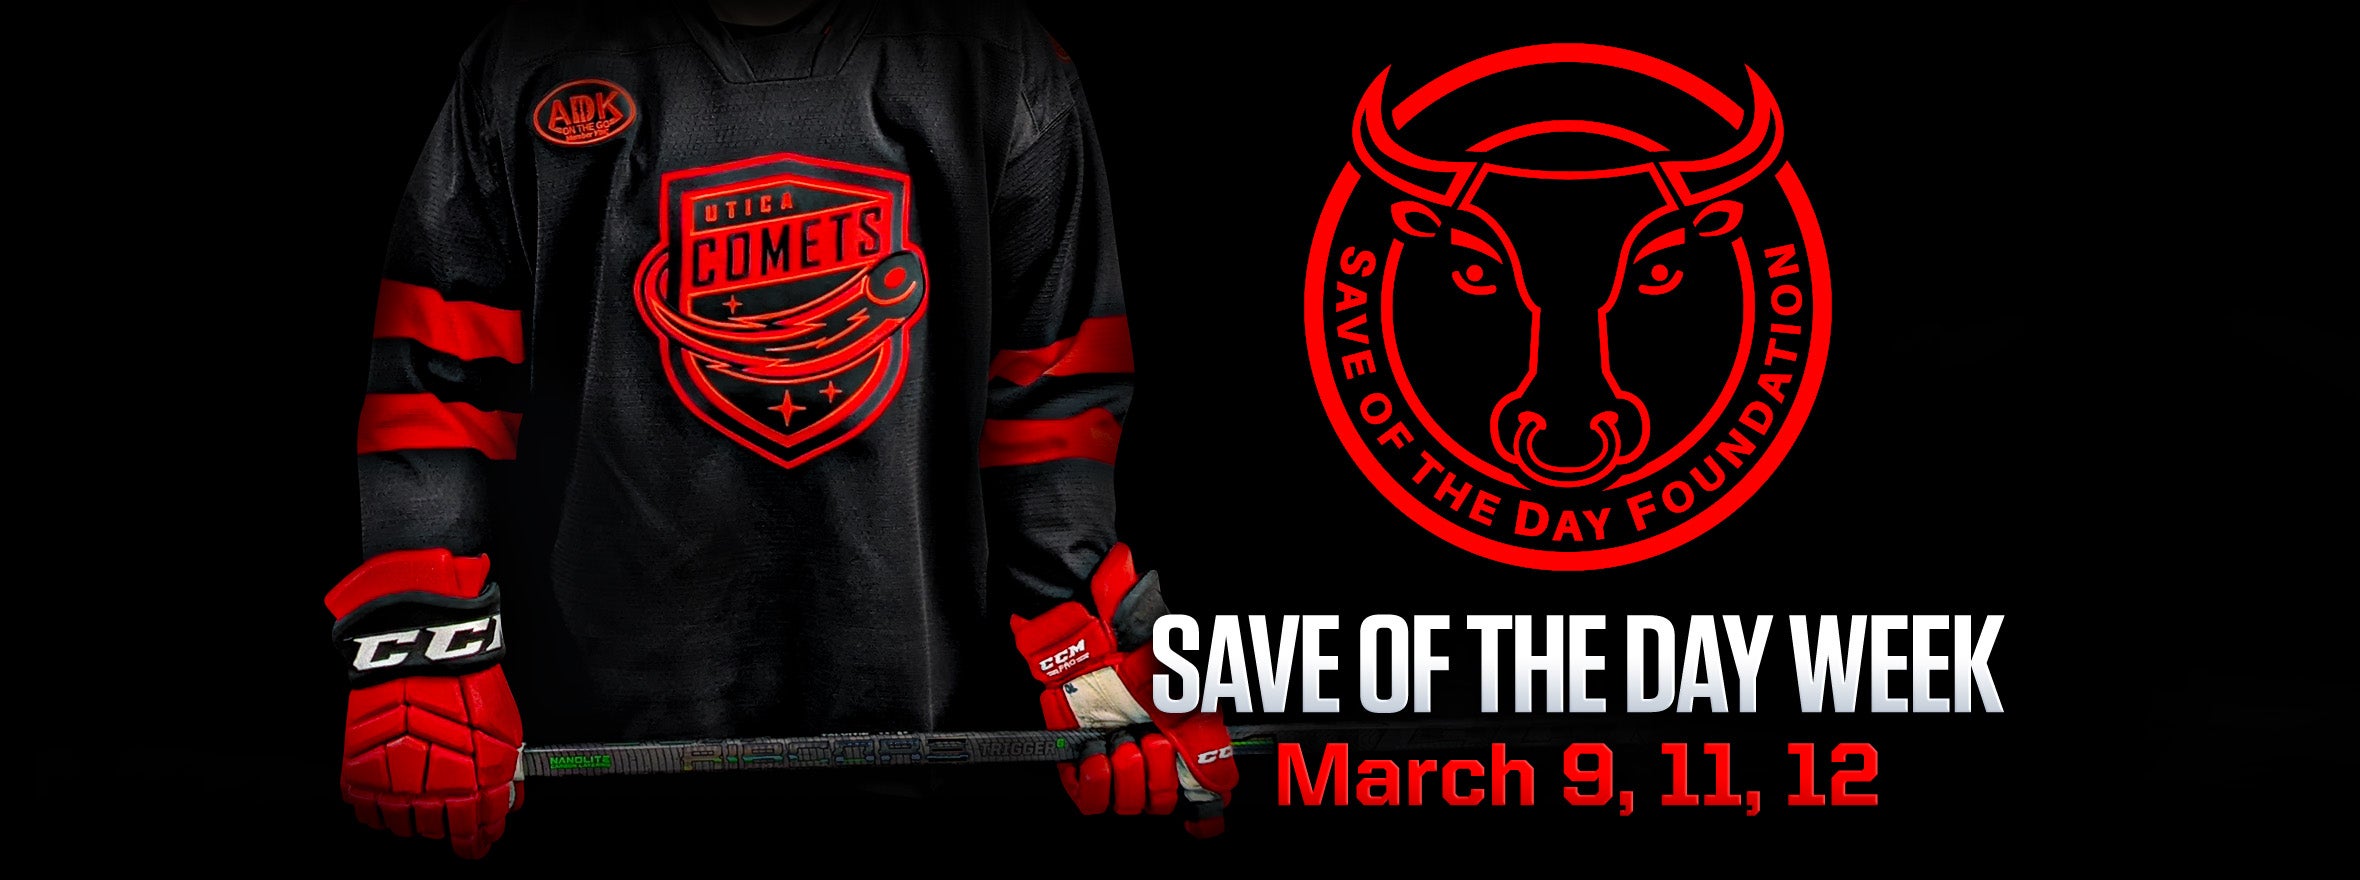 SAVE OF THE DAY FOUNDATION JERSEY REVEALED